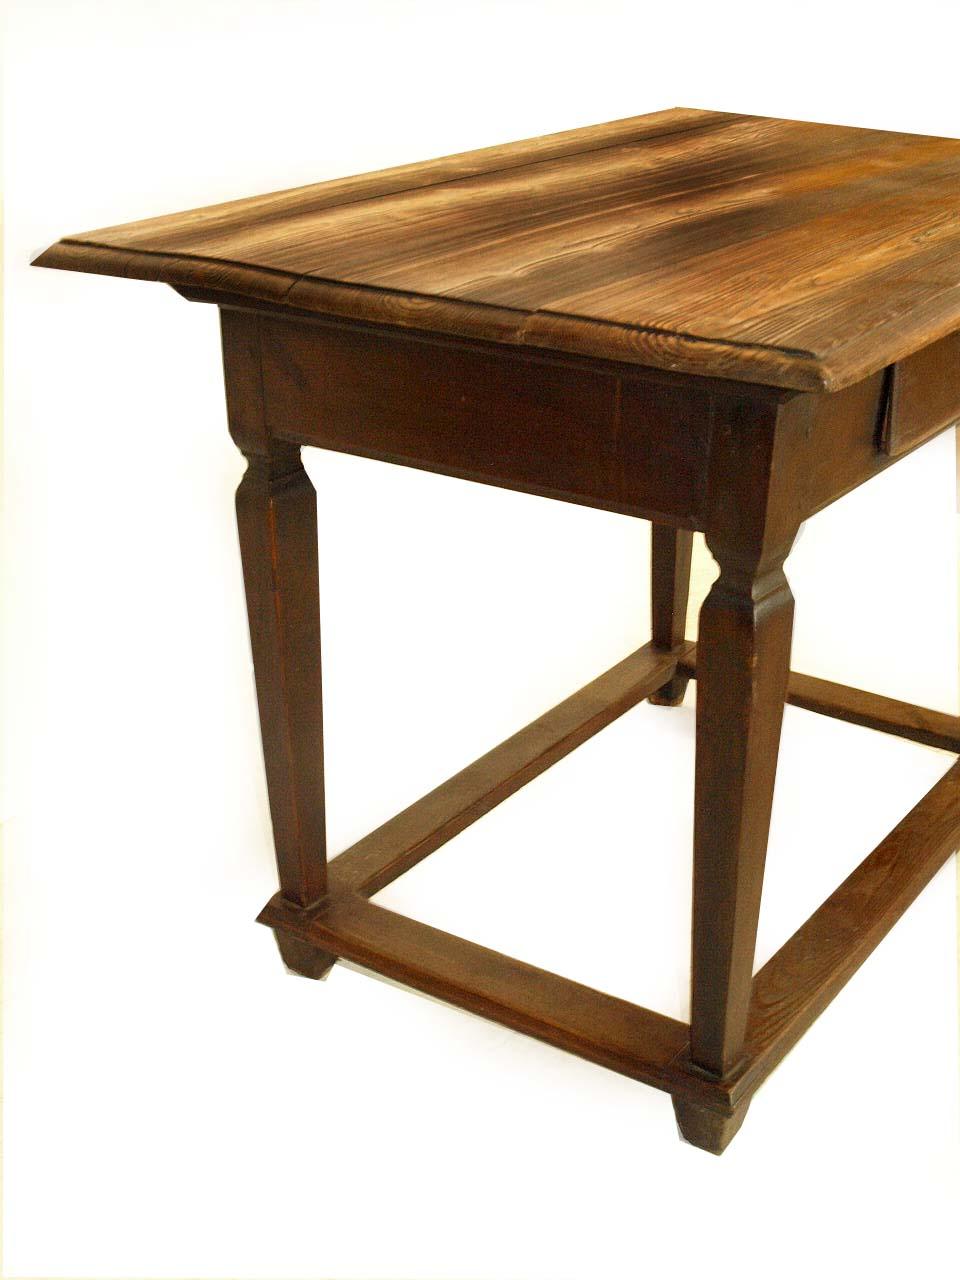 Russian painted pine one drawer tavern table with exposed double peg construction, the top with extended overhang, molded edge; unusual alternating dark and light striping of the weathered pine( minor scarring near the front noted in photo) ;